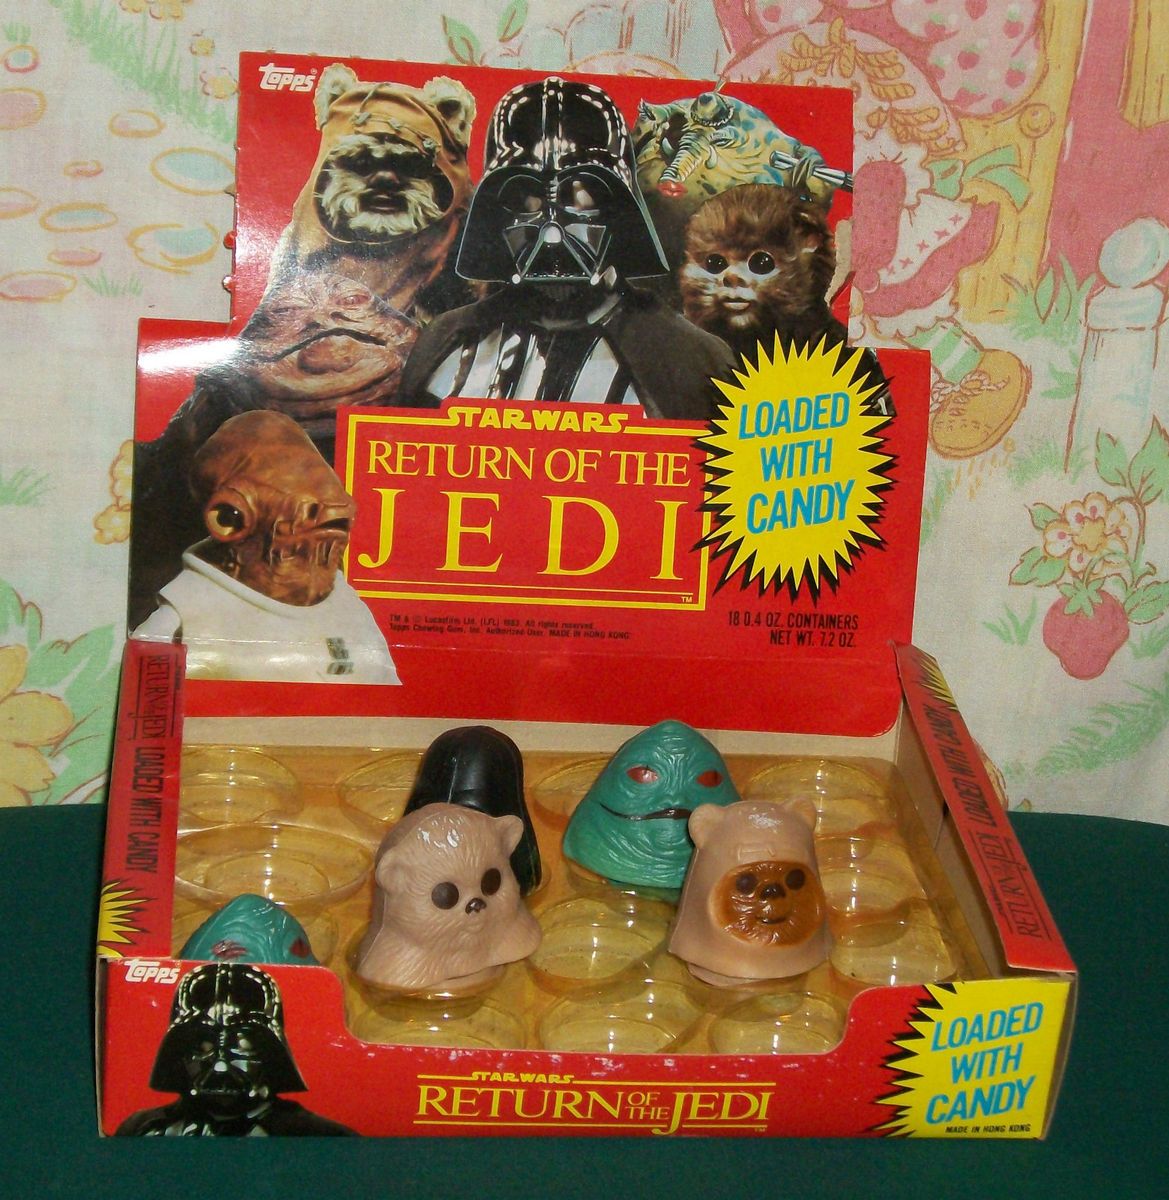   Star Wars Topps RETURN OF THE JEDI CANDY STORE DISPLAY BOX containers